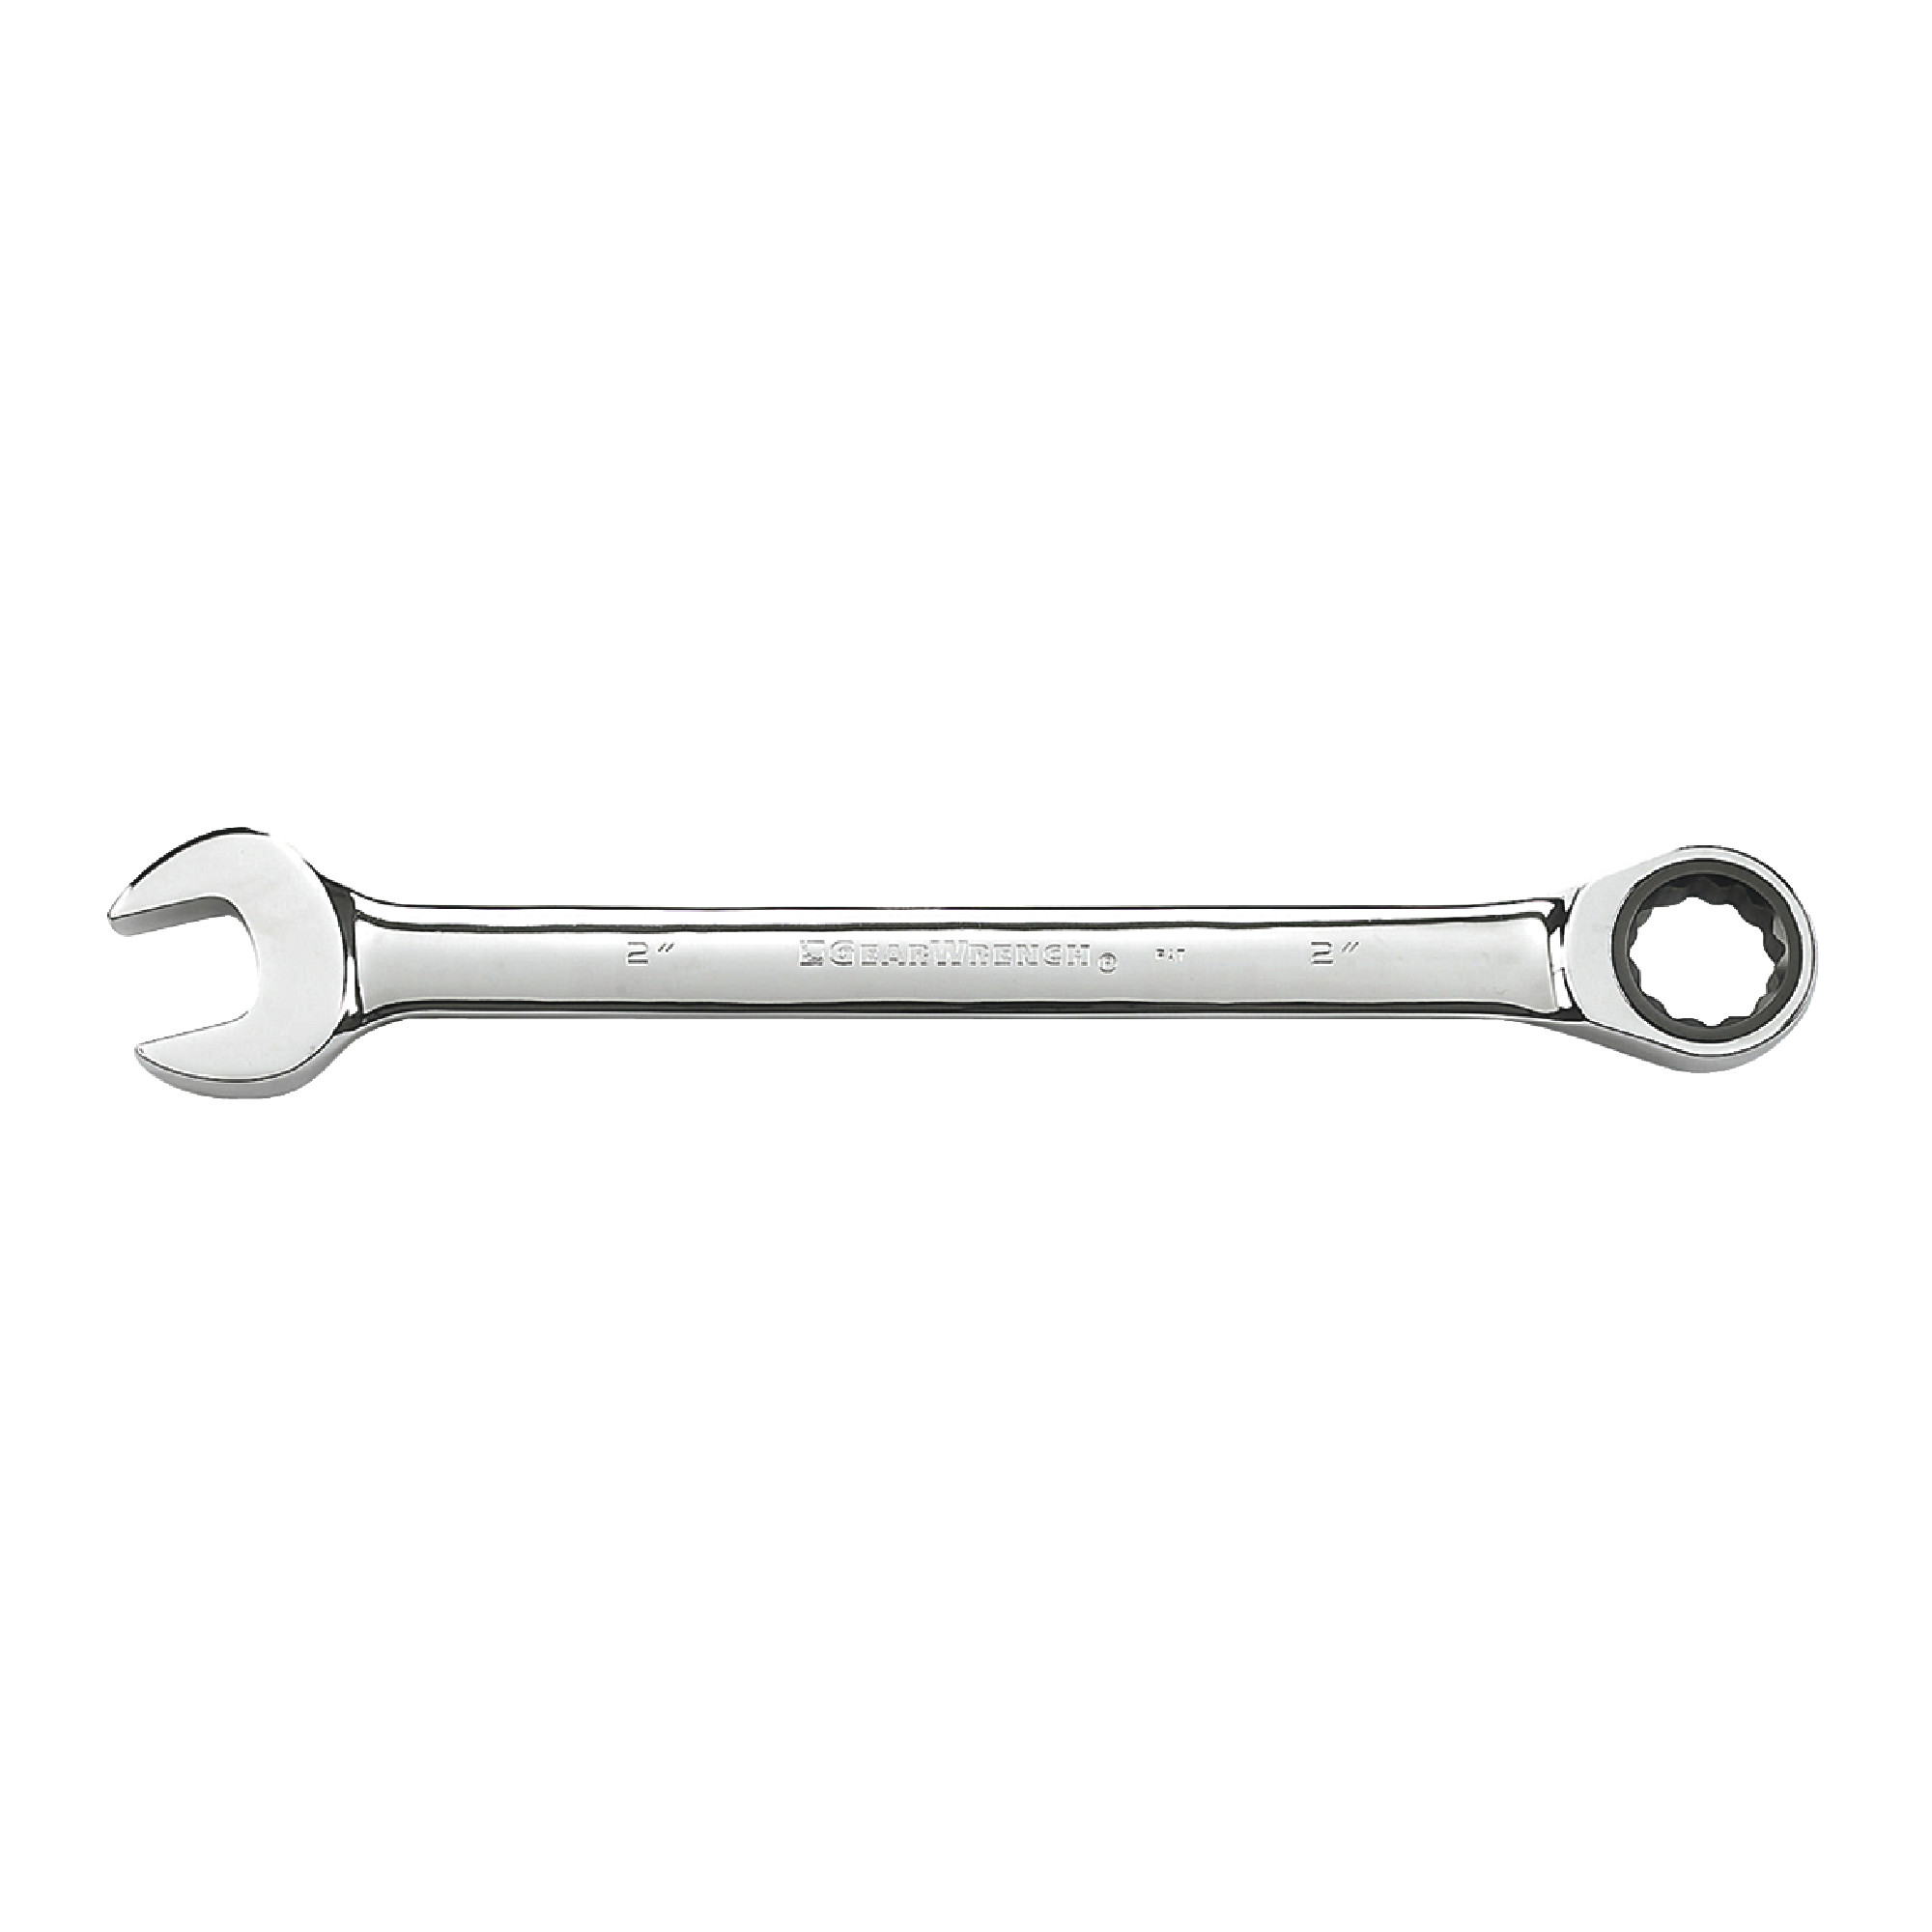 1-1/2" 12 Point Jumbo Ratcheting Combination Wrench